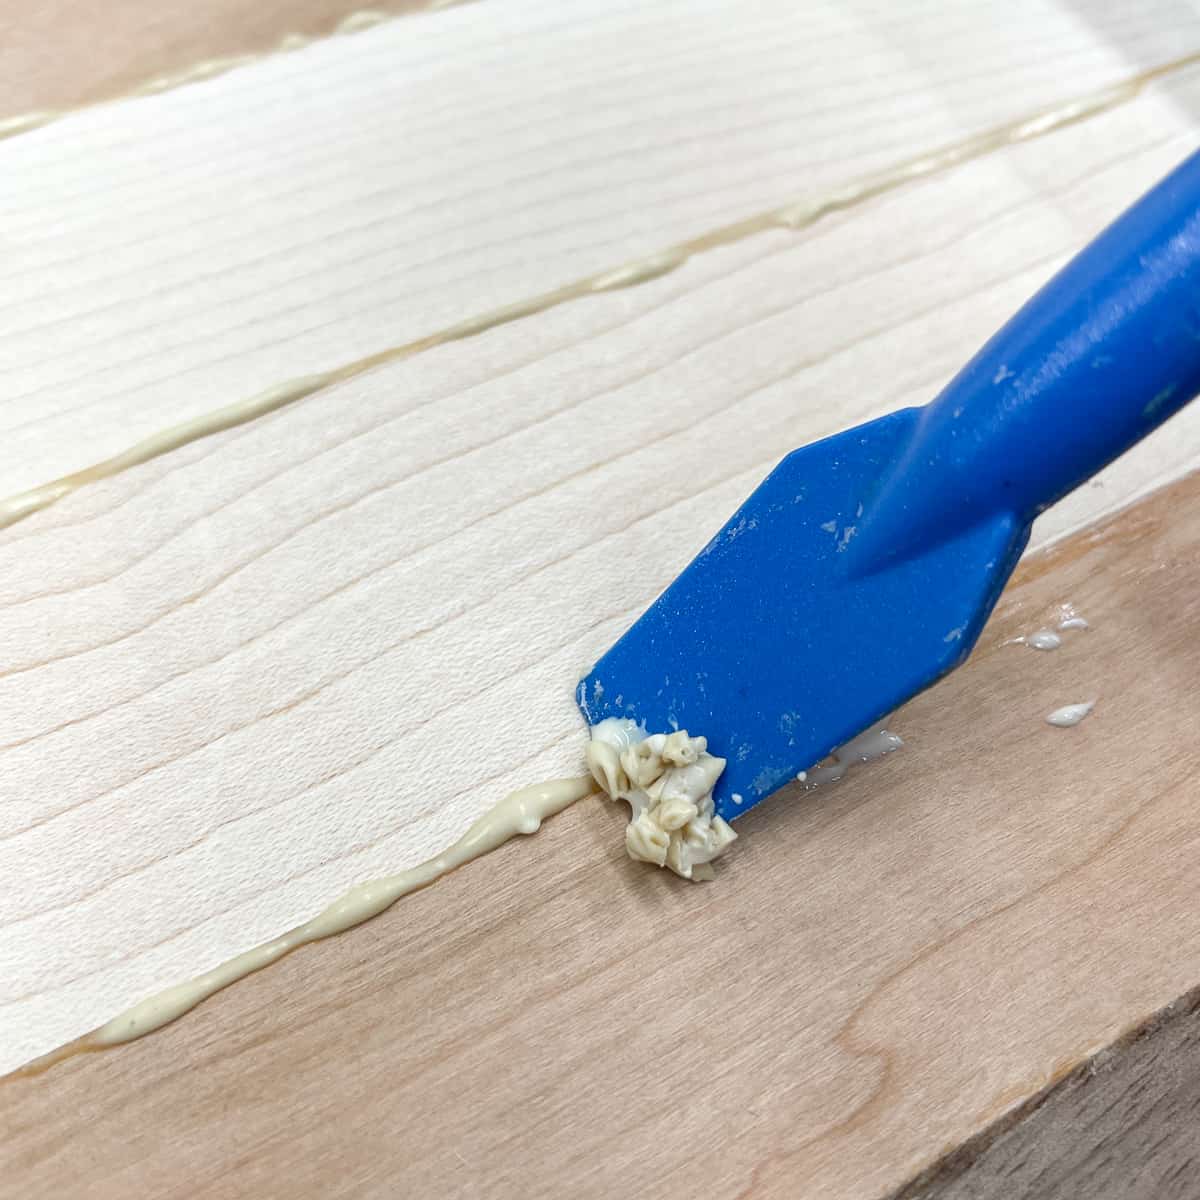 scraping wood glue off cutting board joints